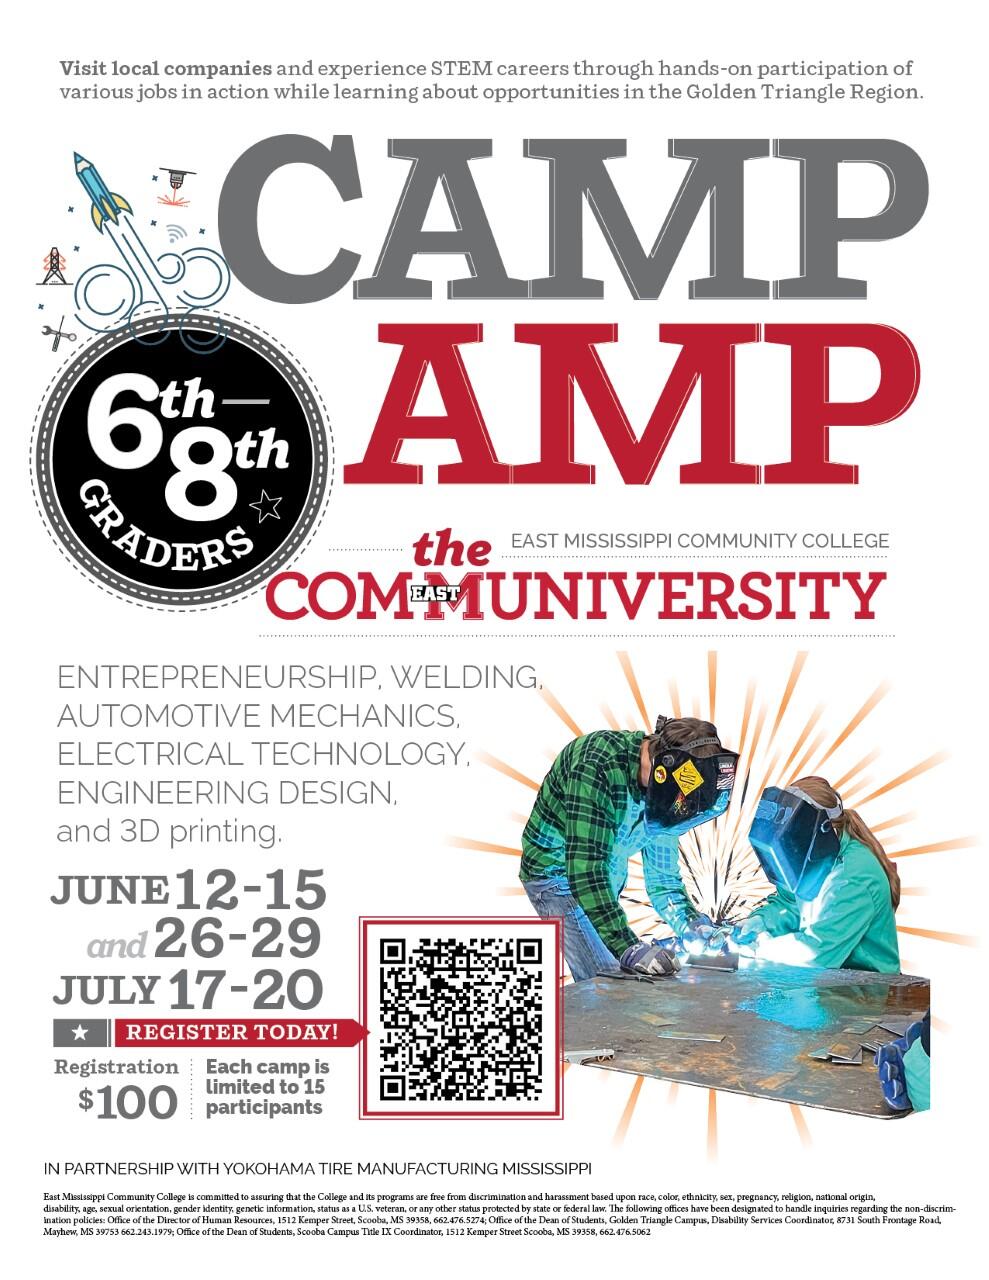 6th-8th Graders Camp Amp flyer